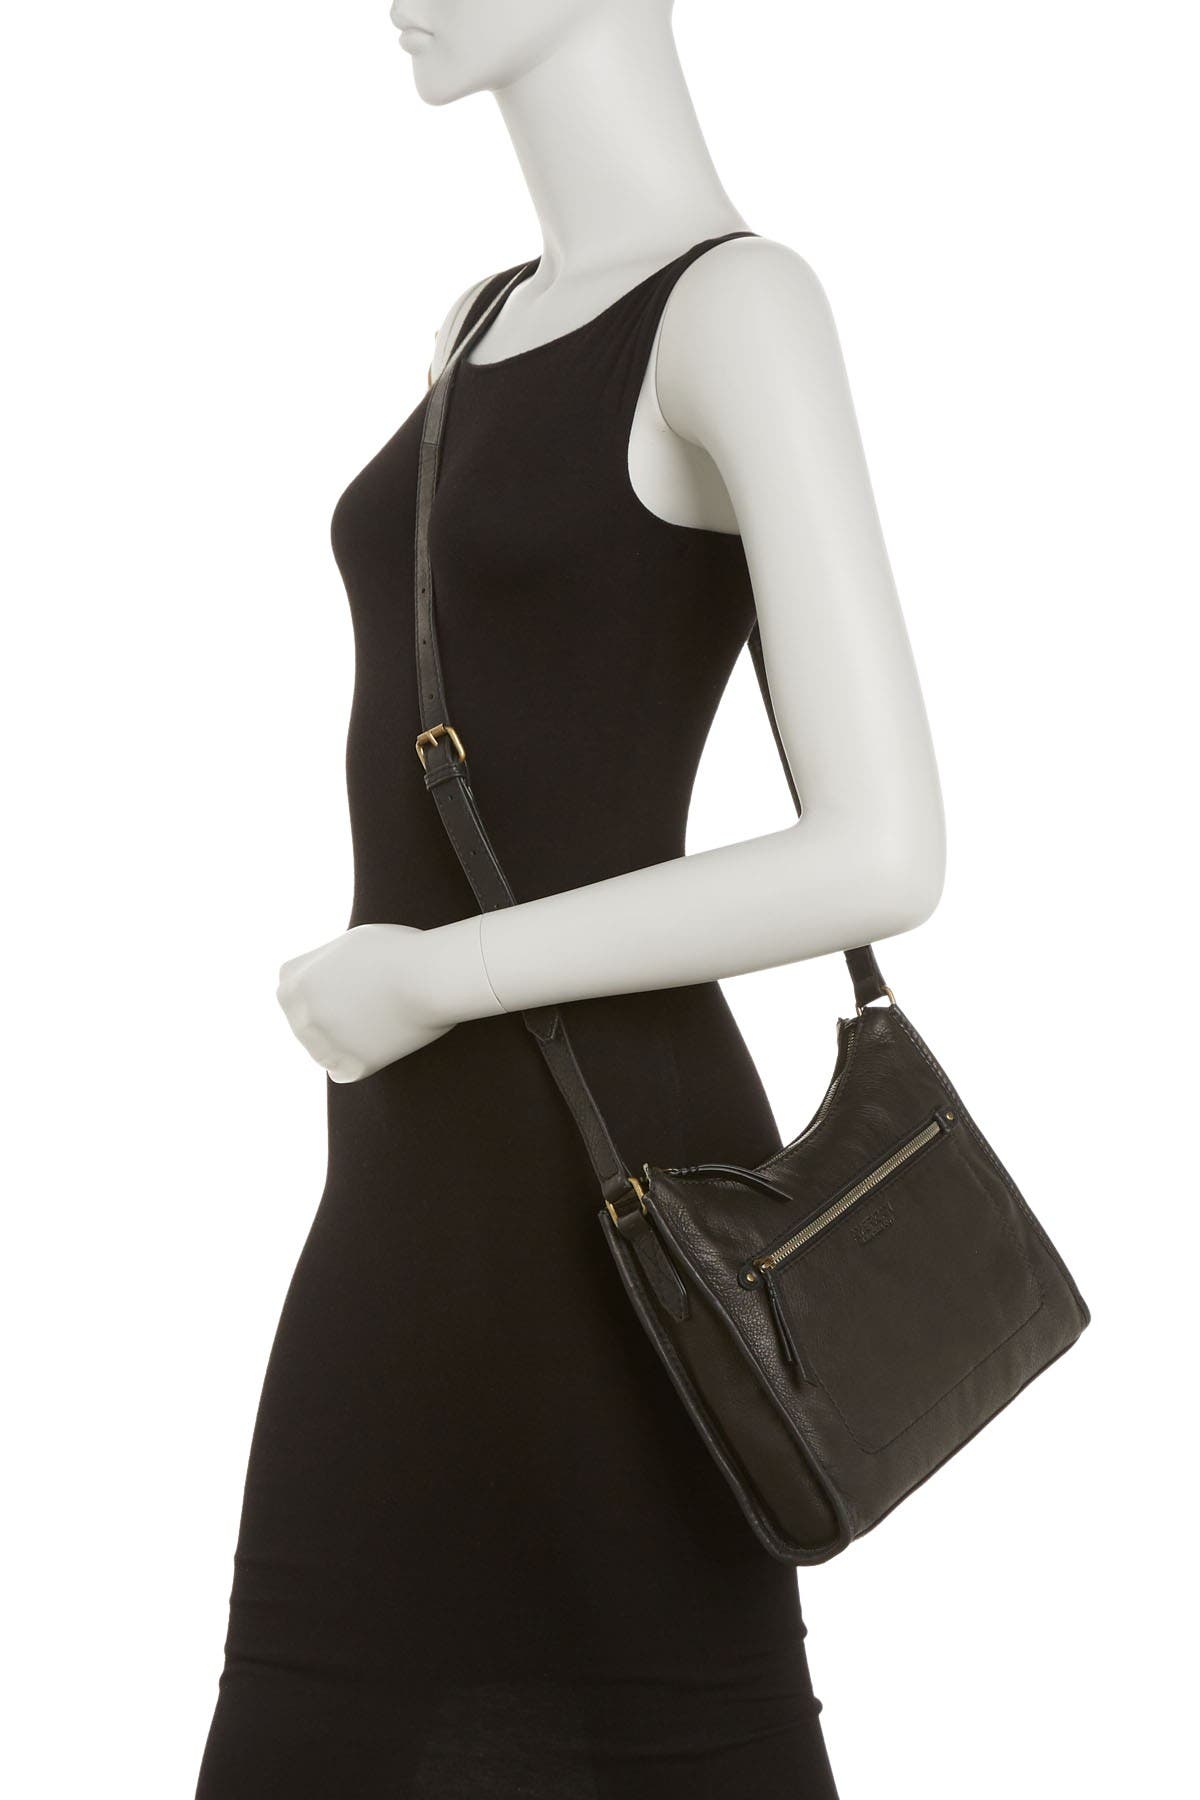 American Leather Co. Chadron Smooth Leather Crossbody In Black Smooth